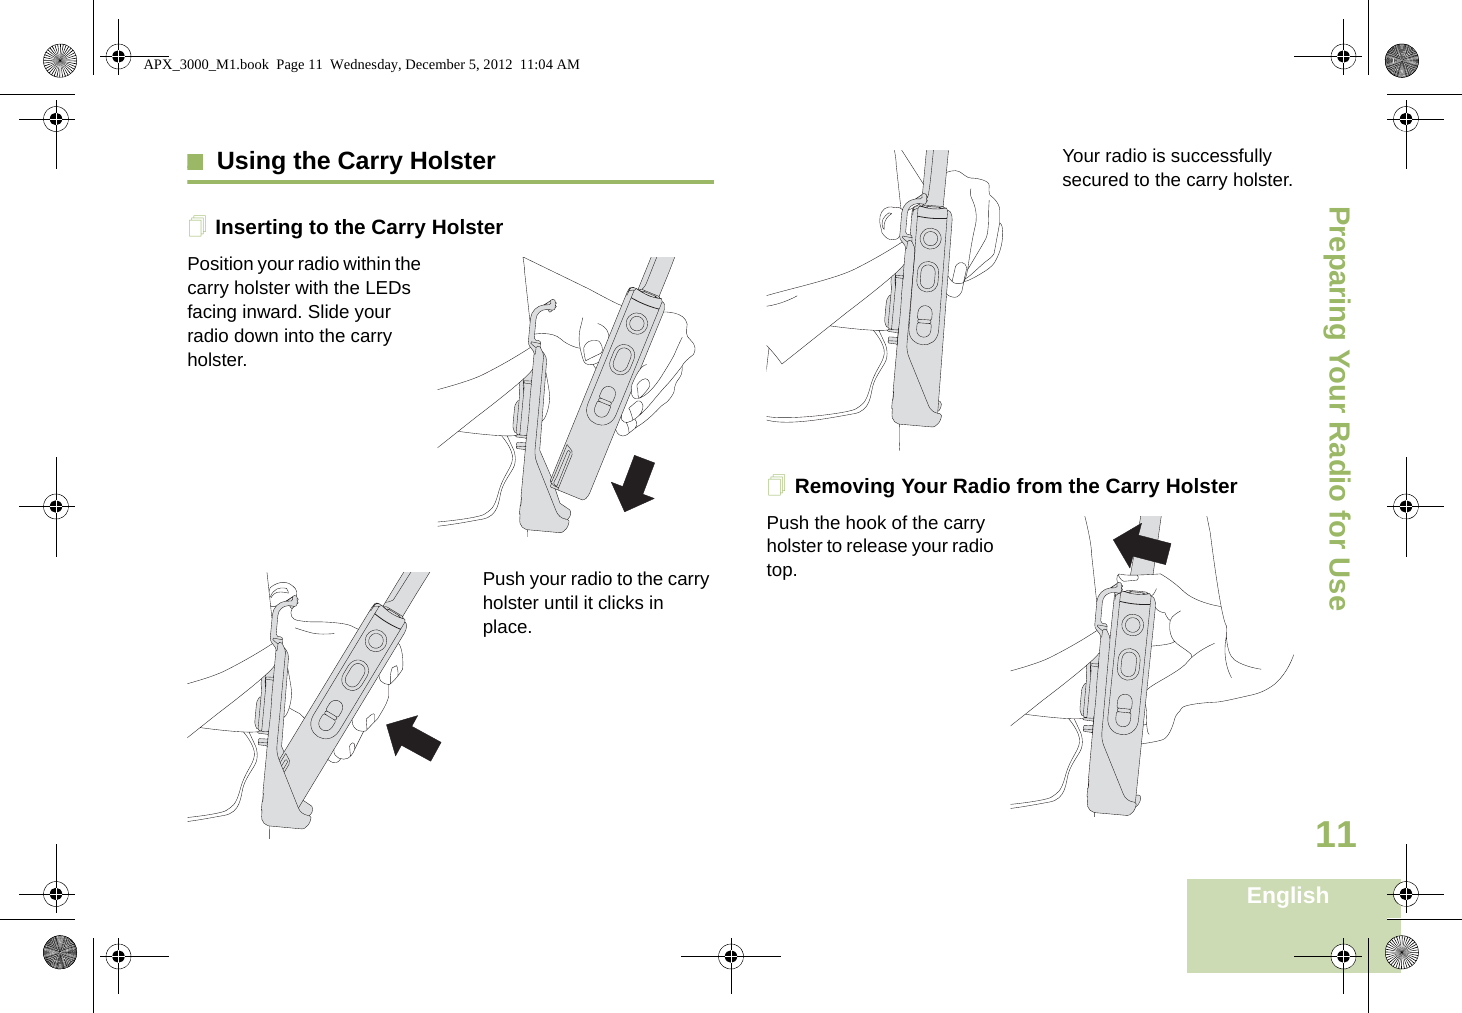 Preparing Your Radio for UseEnglish11Using the Carry HolsterInserting to the Carry HolsterPosition your radio within the carry holster with the LEDs facing inward. Slide your radio down into the carry holster.Push your radio to the carry holster until it clicks in place.Your radio is successfully secured to the carry holster.Removing Your Radio from the Carry HolsterPush the hook of the carry holster to release your radio top. APX_3000_M1.book  Page 11  Wednesday, December 5, 2012  11:04 AM